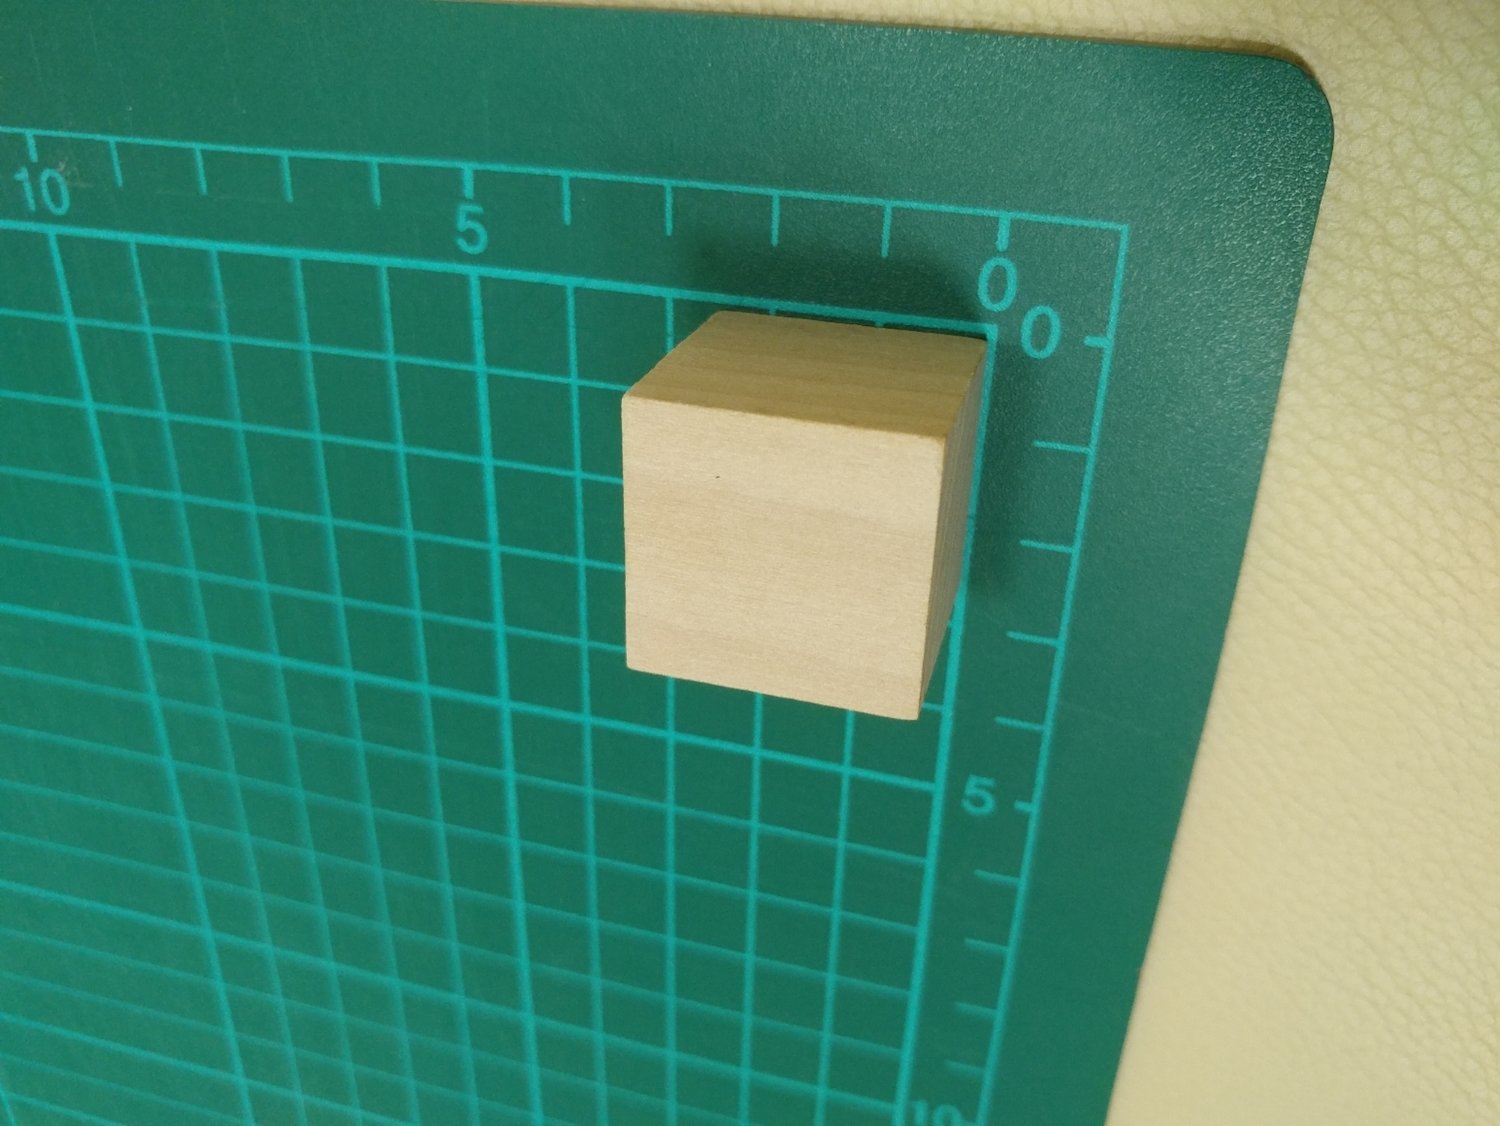 EASI 05:PC - 1 Inch Wooden Cube